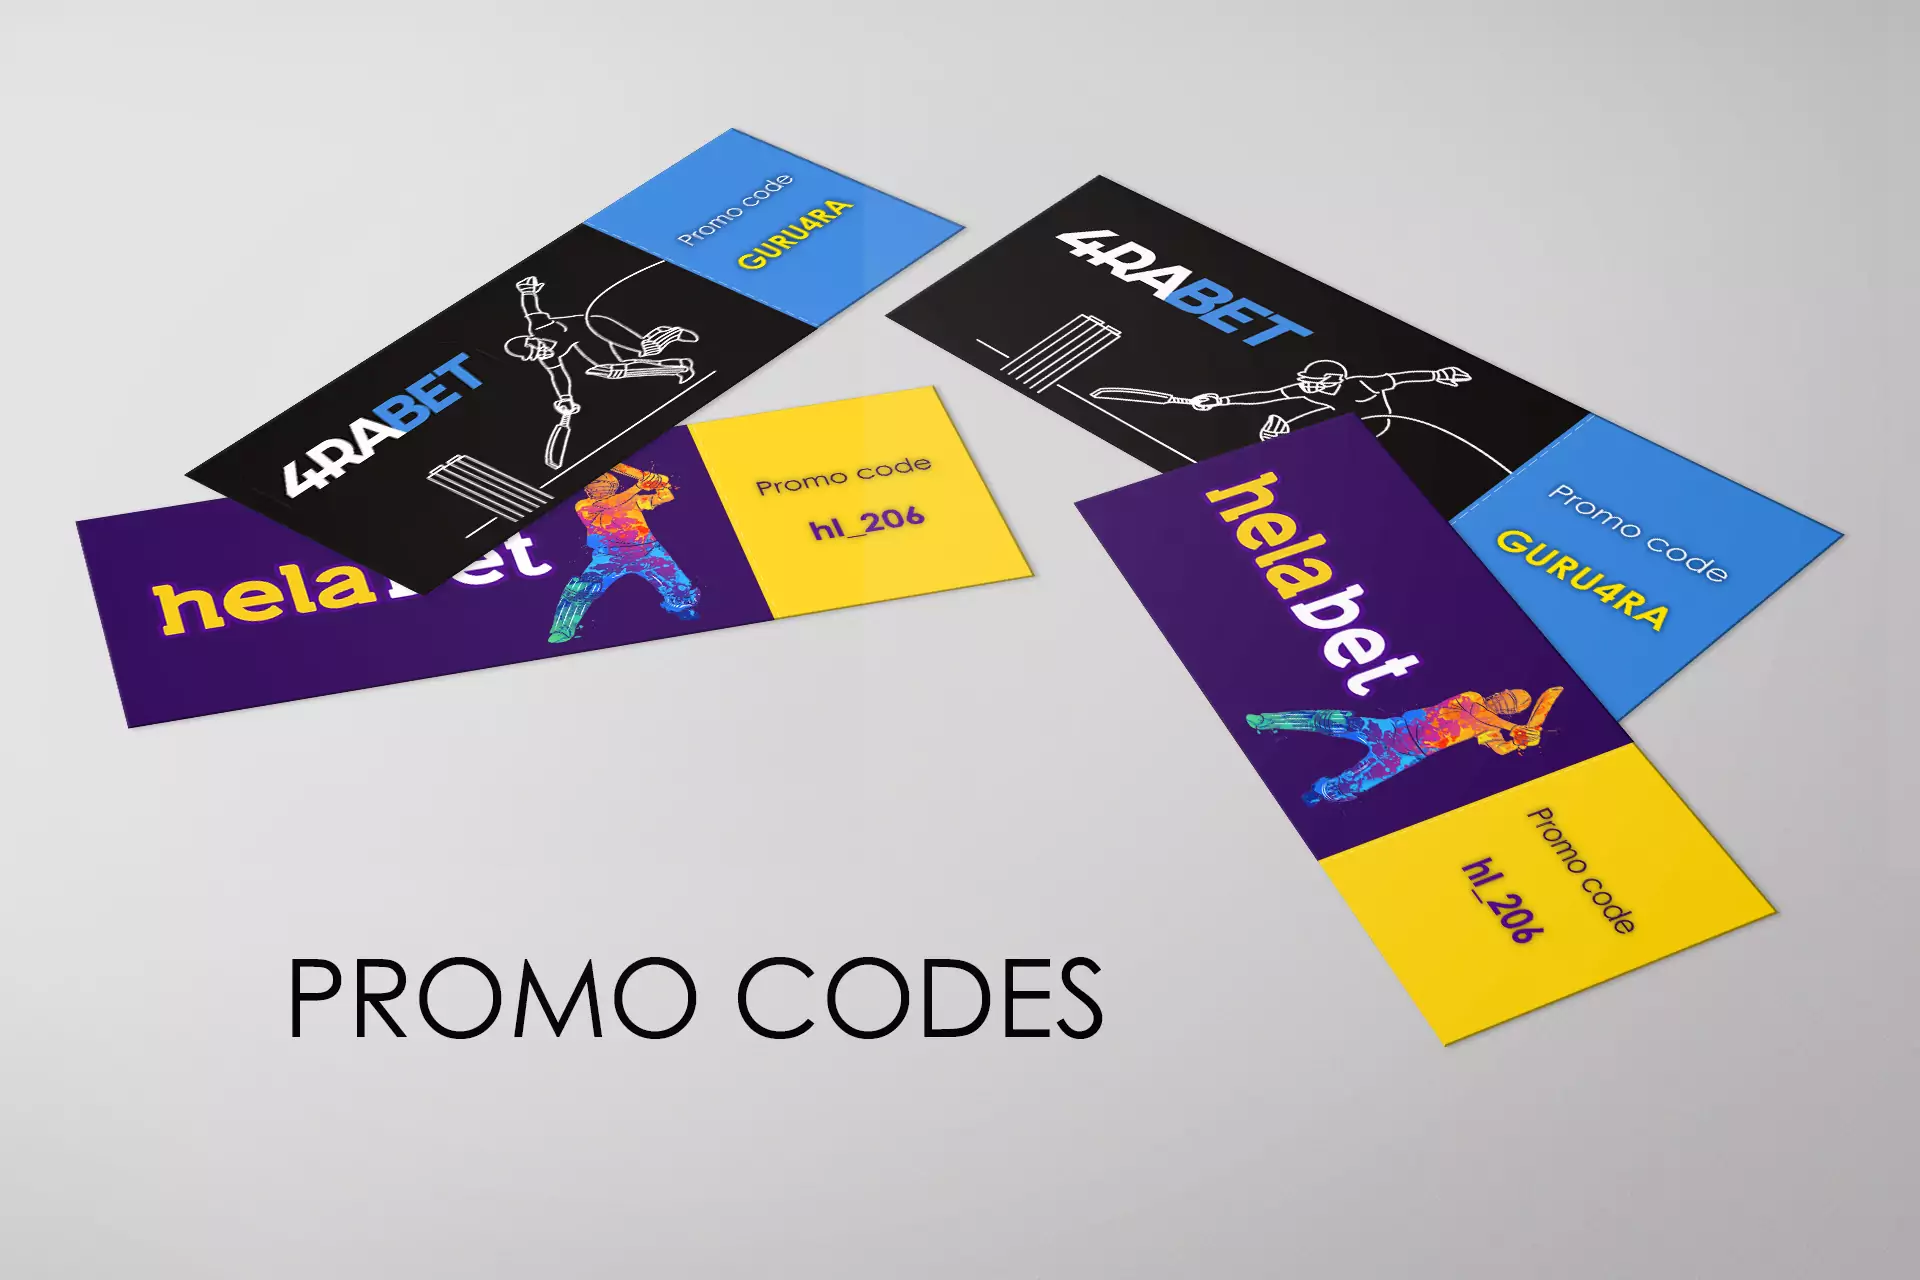 Promo codes for cricket betting allow you to get unique bonuses.